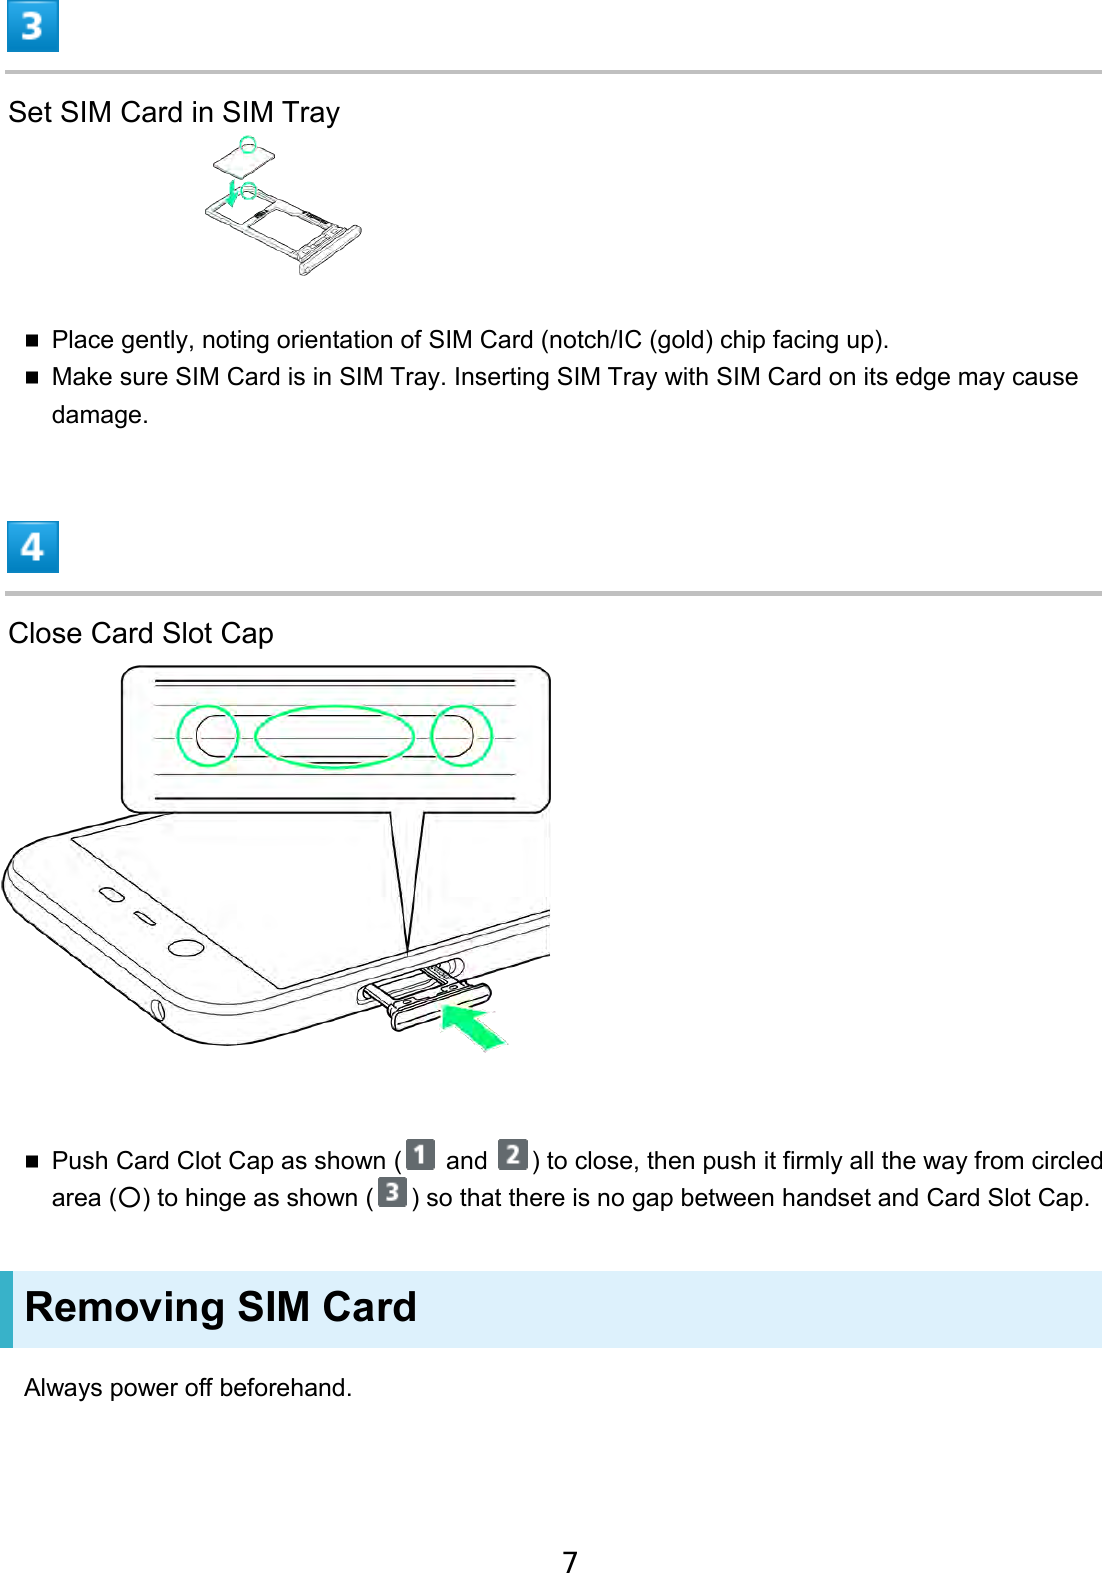 Set SIM Card in SIM Tray Place gently, noting orientation of SIM Card (notch/IC (gold) chip facing up).Make sure SIM Card is in SIM Tray. Inserting SIM Tray with SIM Card on its edge may cause damage.Close Card Slot Cap Push Card Clot Cap as shown (  and  ) to close, then push it firmly all the way from circled area (○) to hinge as shown ( ) so that there is no gap between handset and Card Slot Cap. Removing SIM Card Always power off beforehand. 7